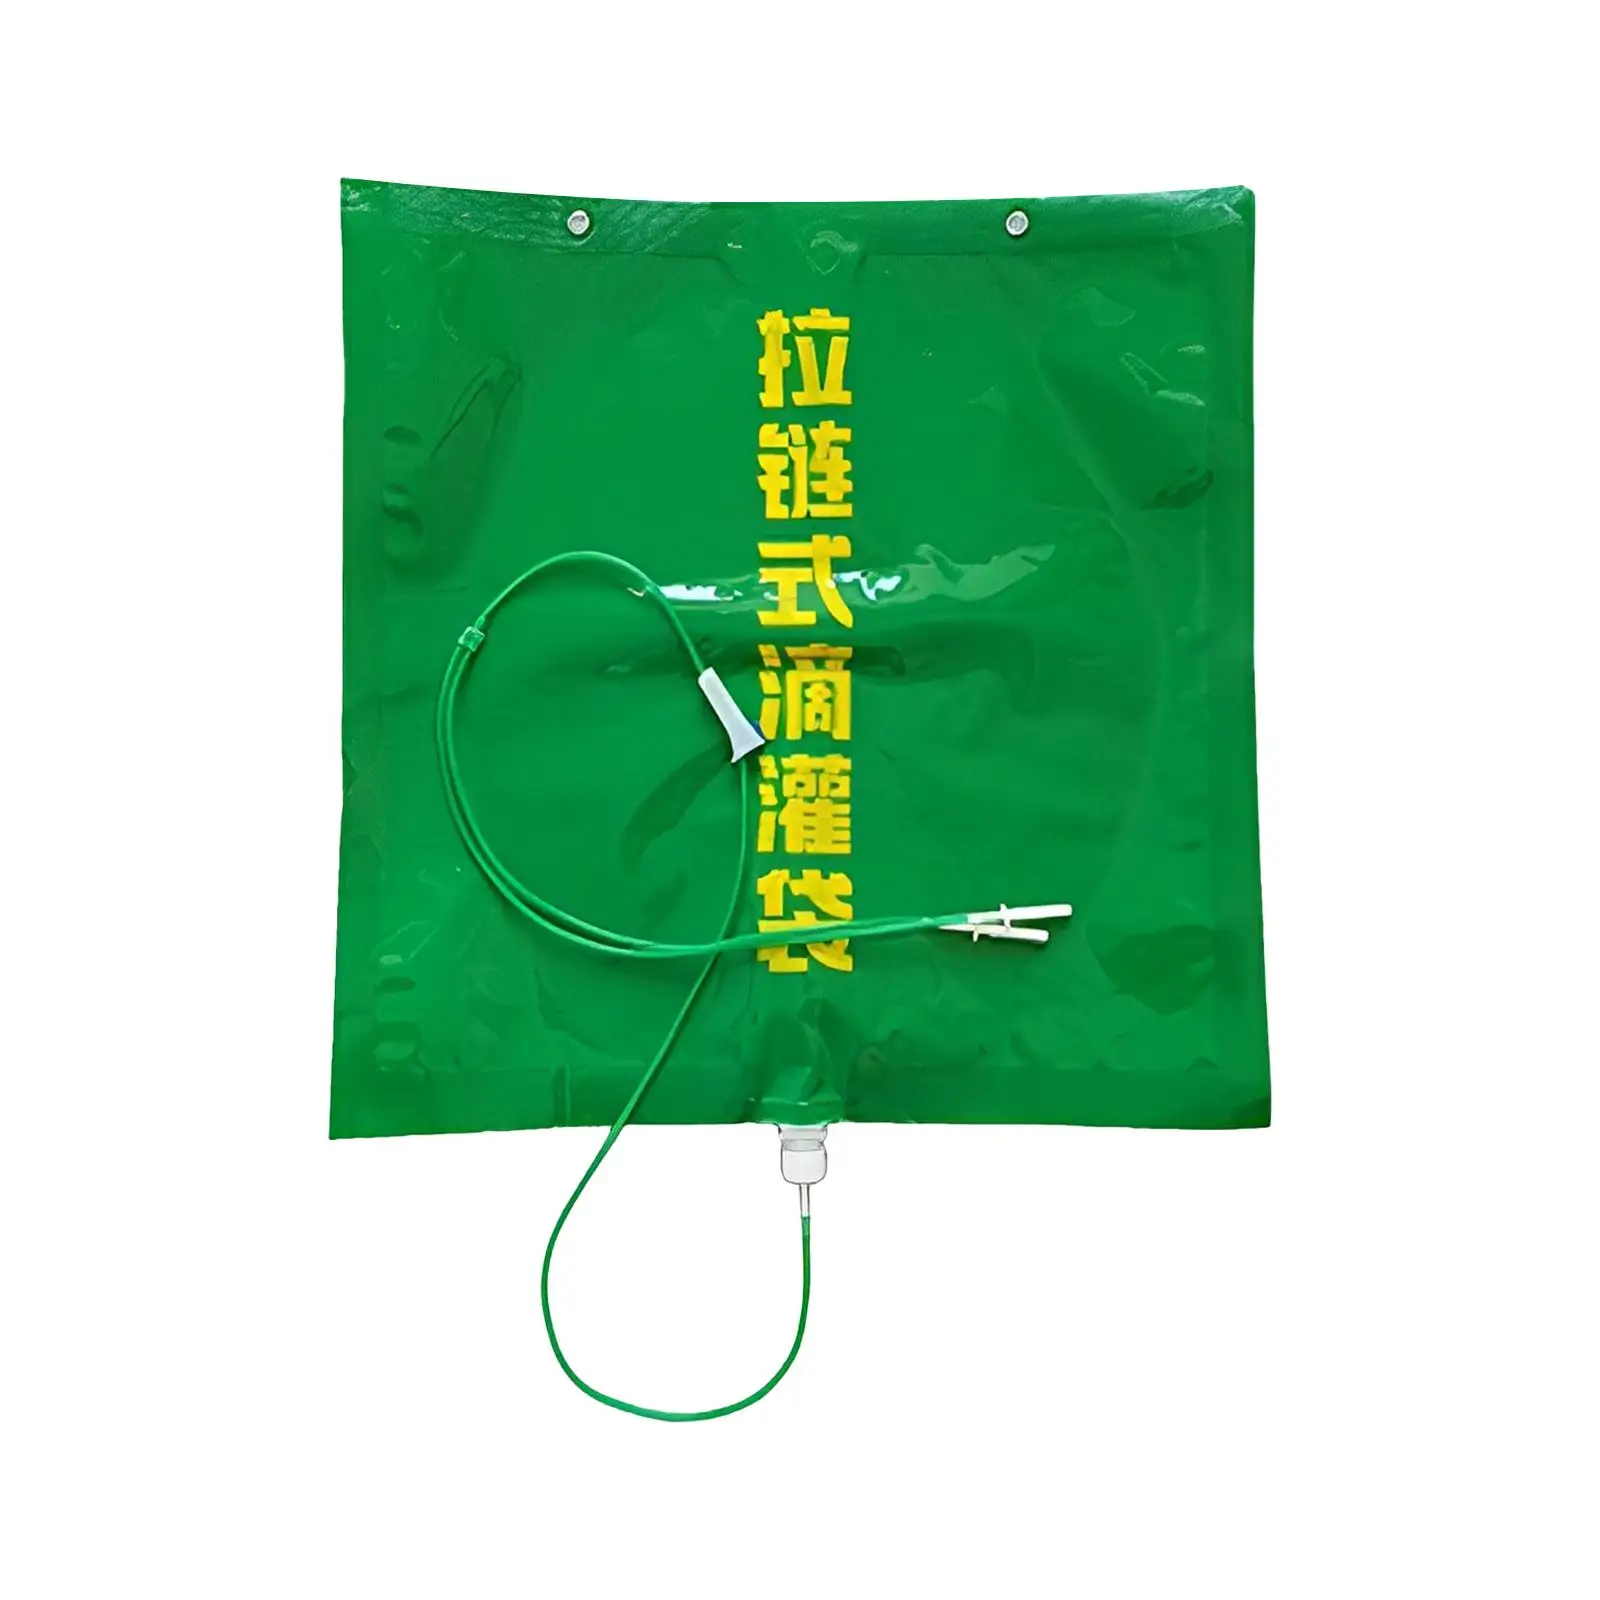 Plant Drip Irrigation Bag Automatic Watering System Reusable Automatic Irrigation Device for Garden Indoor Outdoor Landscaping